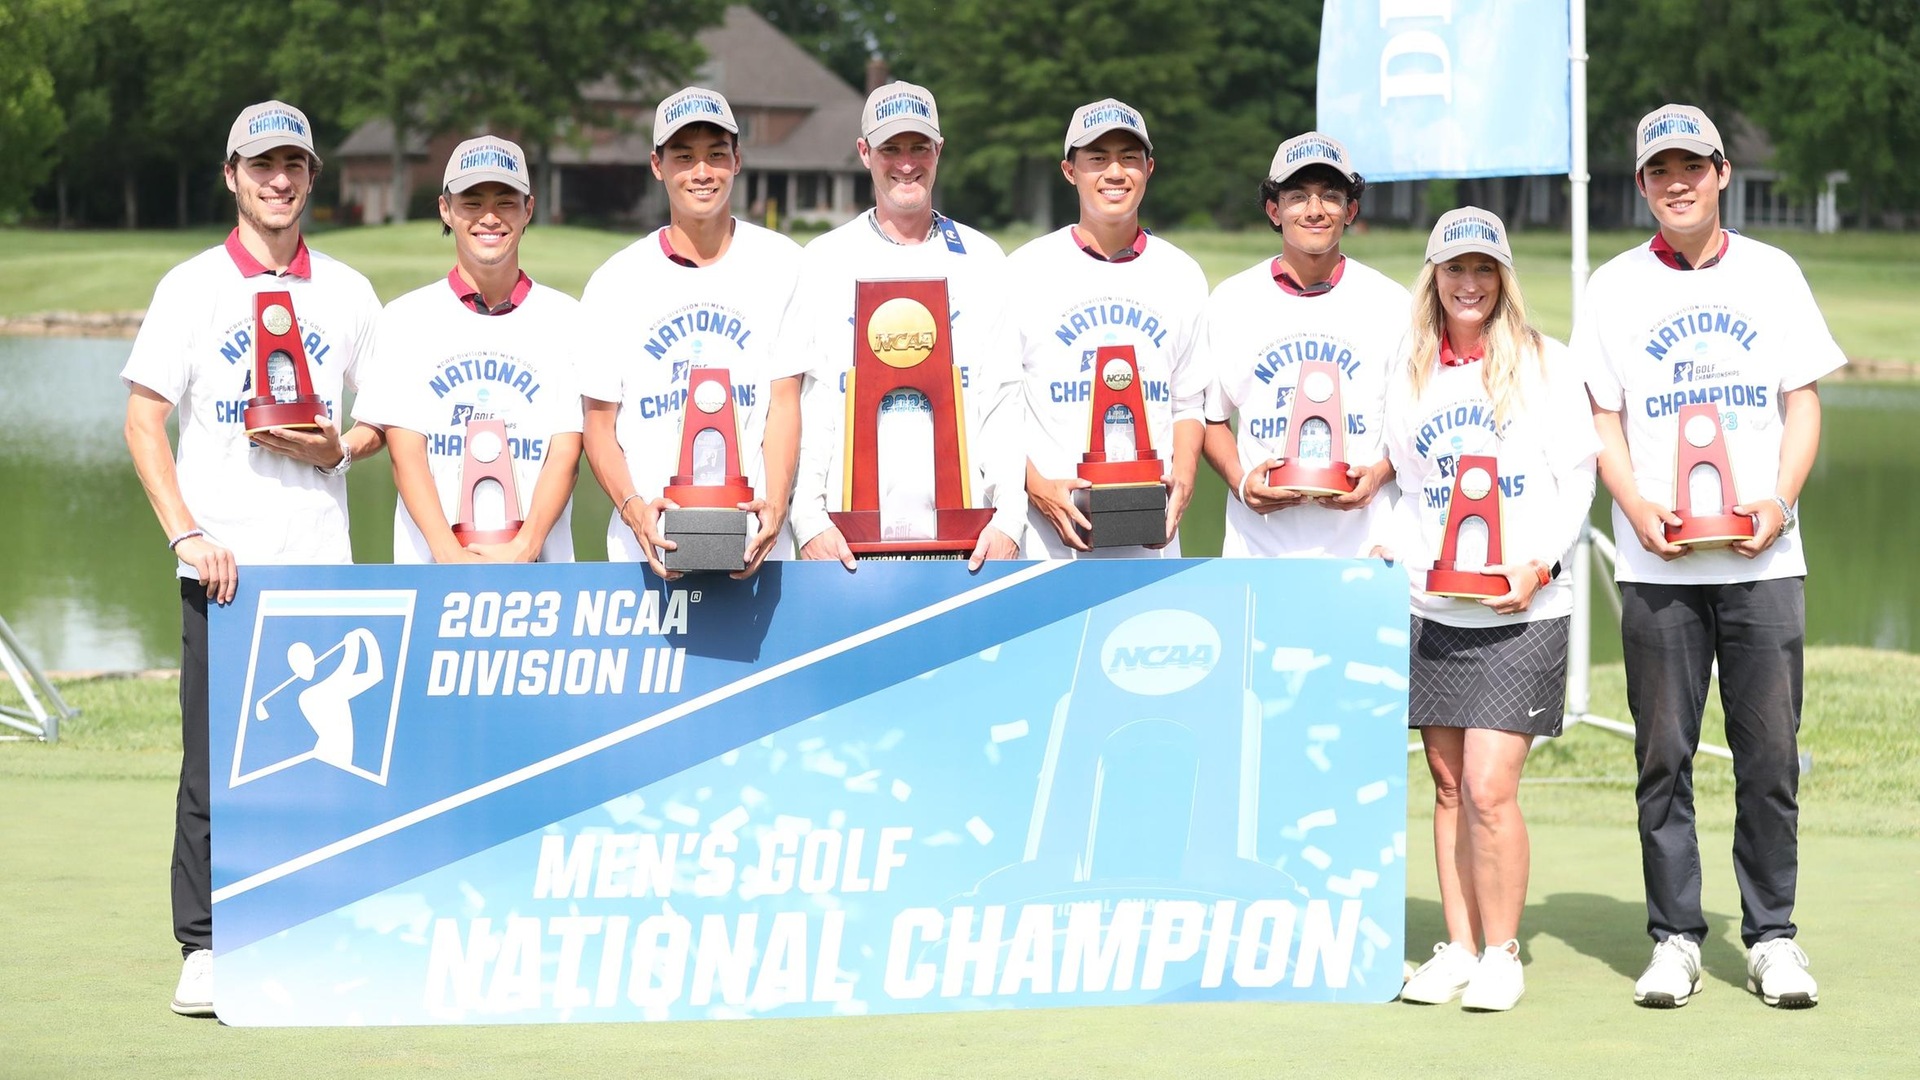 NATIONAL CHAMPIONS! Men’s Golf Wins the First NCAA Team Title in CMU Athletics History